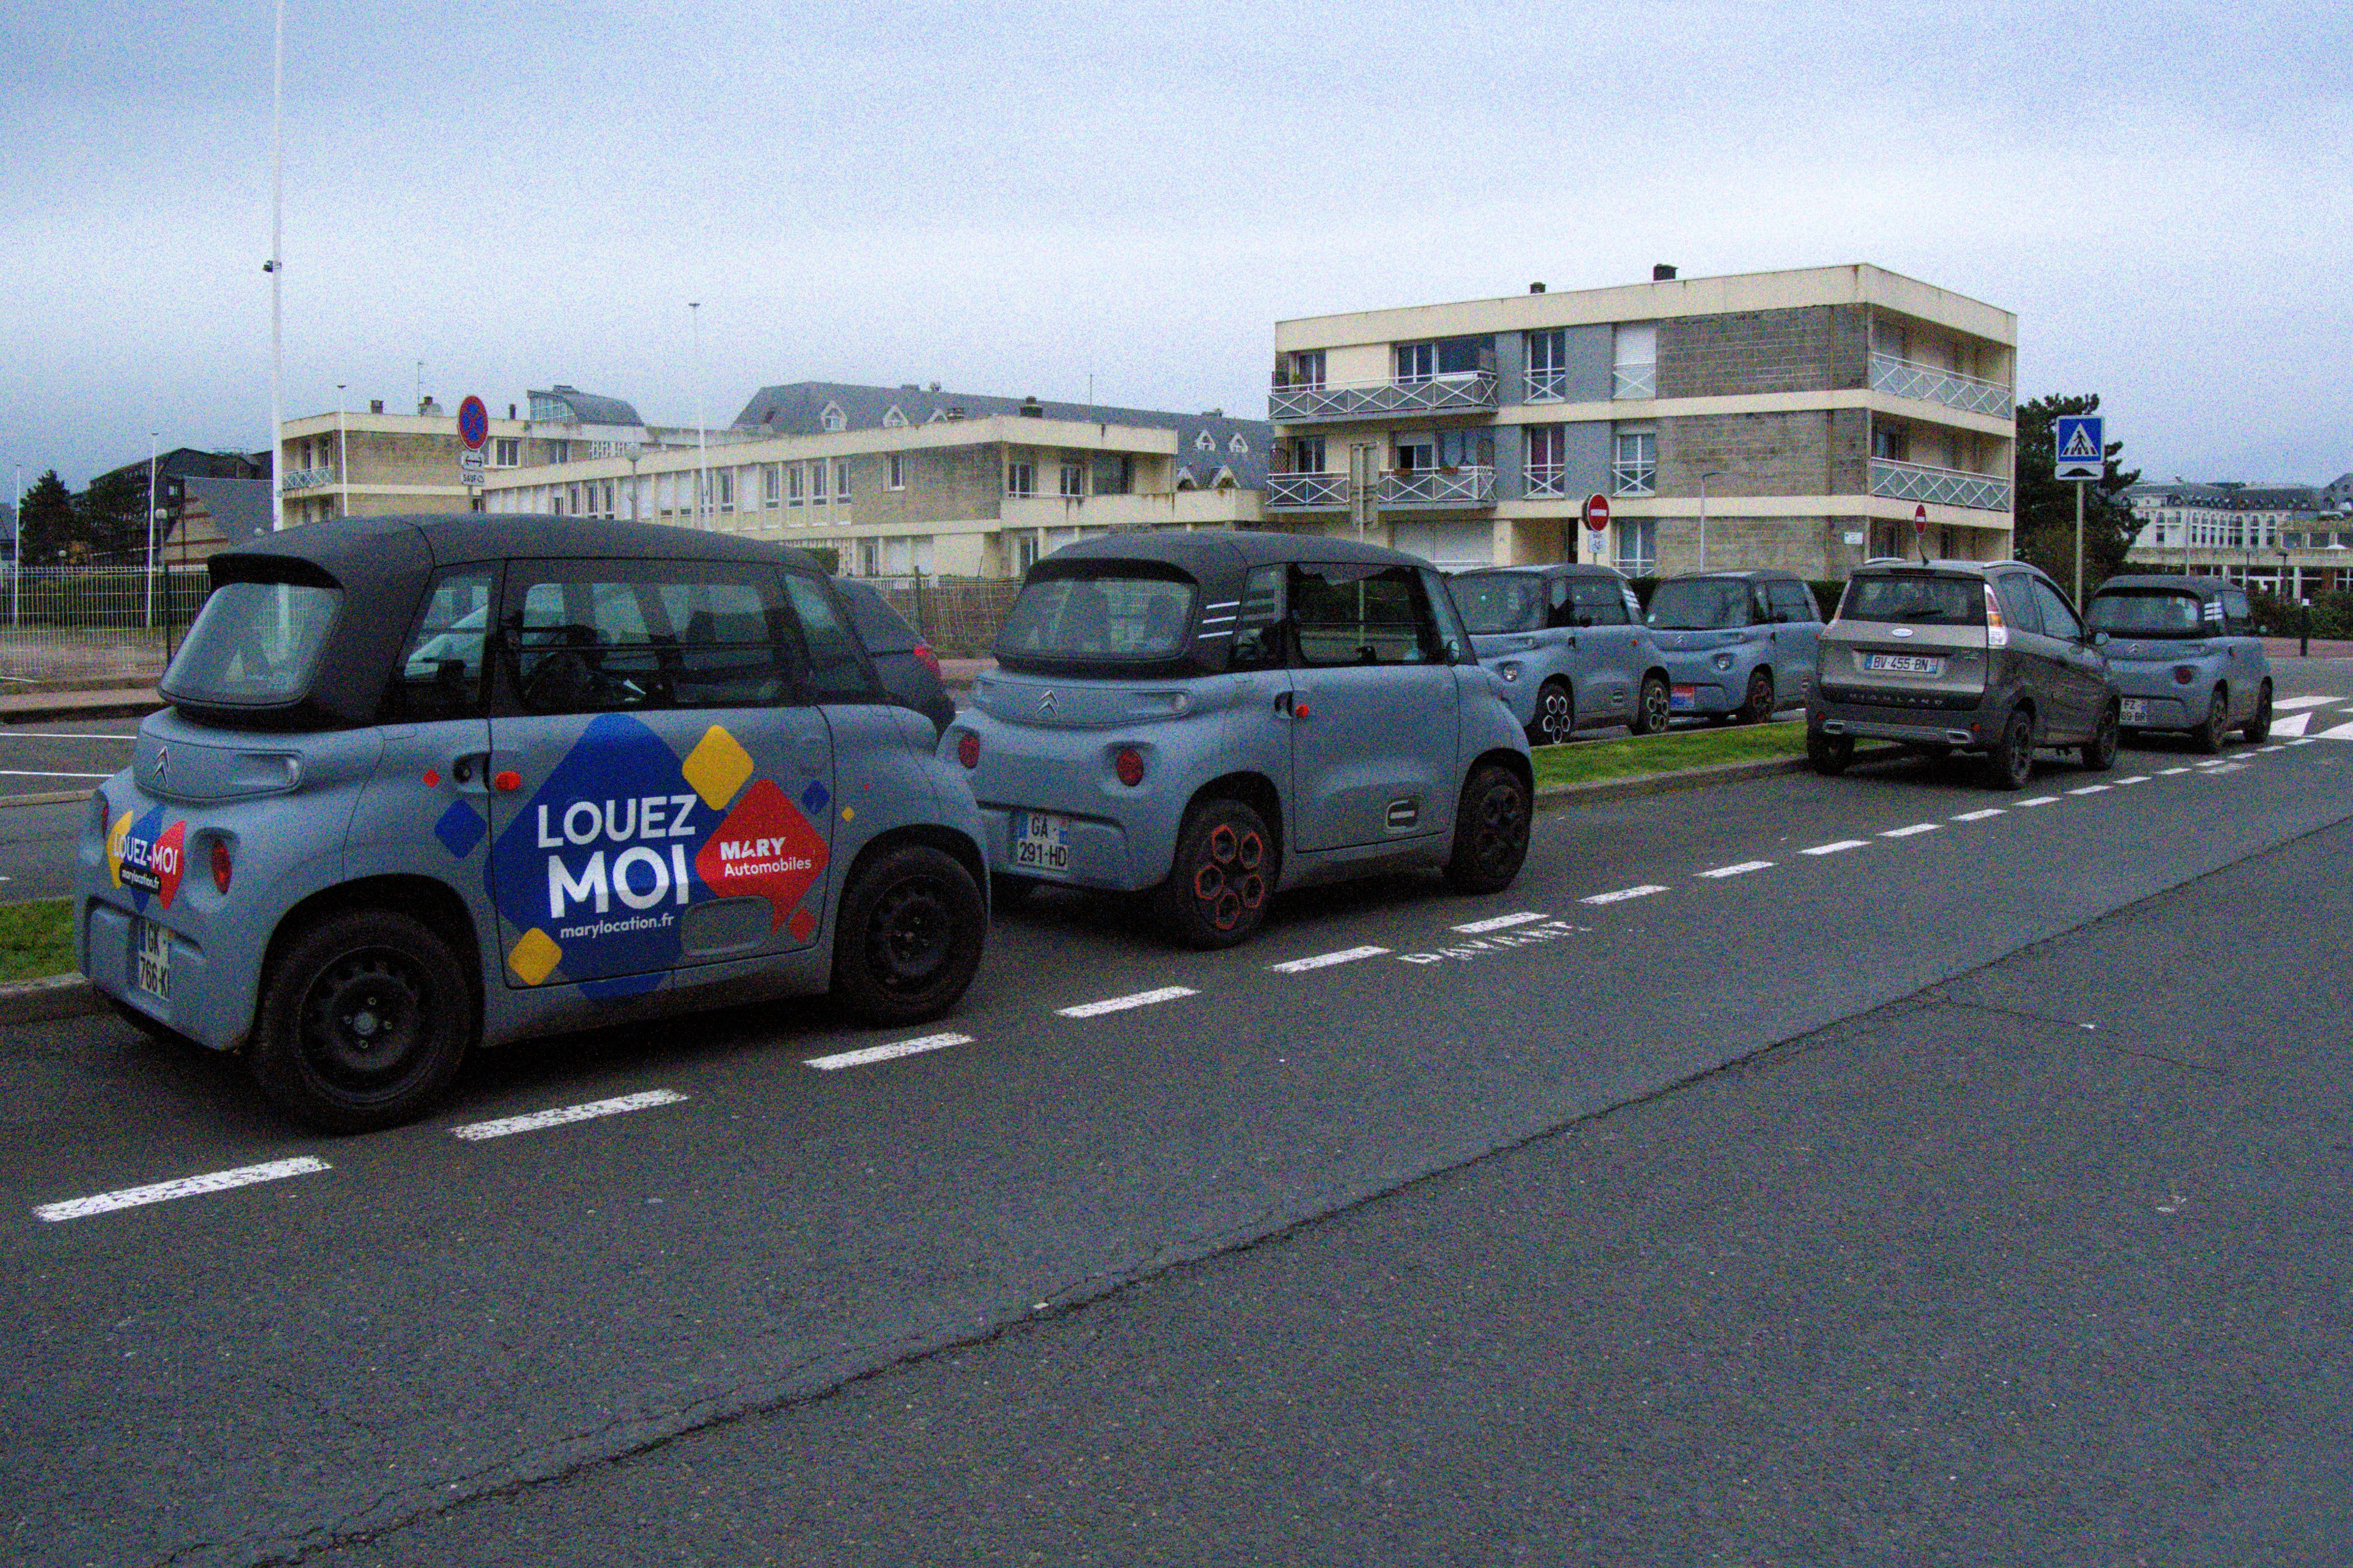 Citroën Amis outside a school in Deauville, France, on 1 December